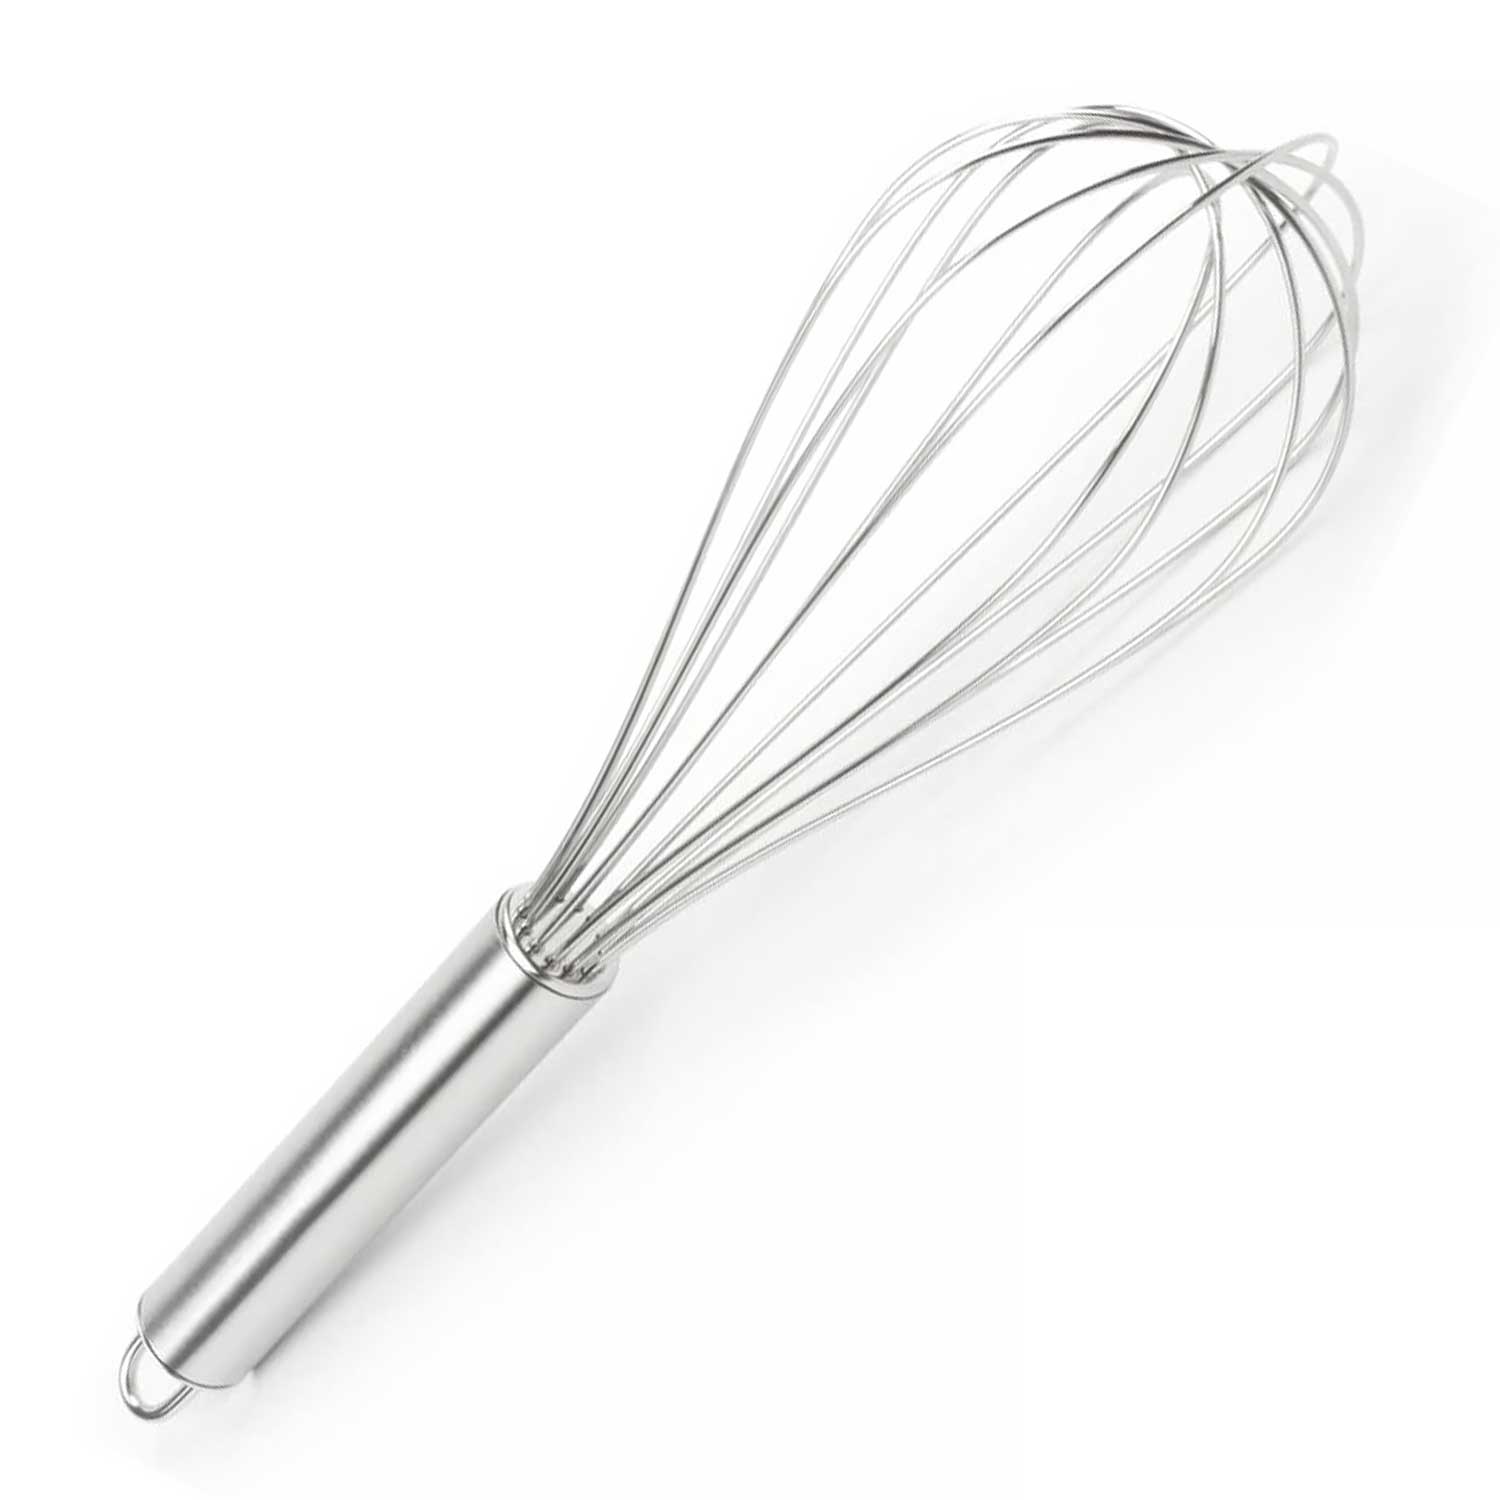 STAINLESS STEEL WHISKS - FOR COMMERCIAL USE – HITACHIYA USA